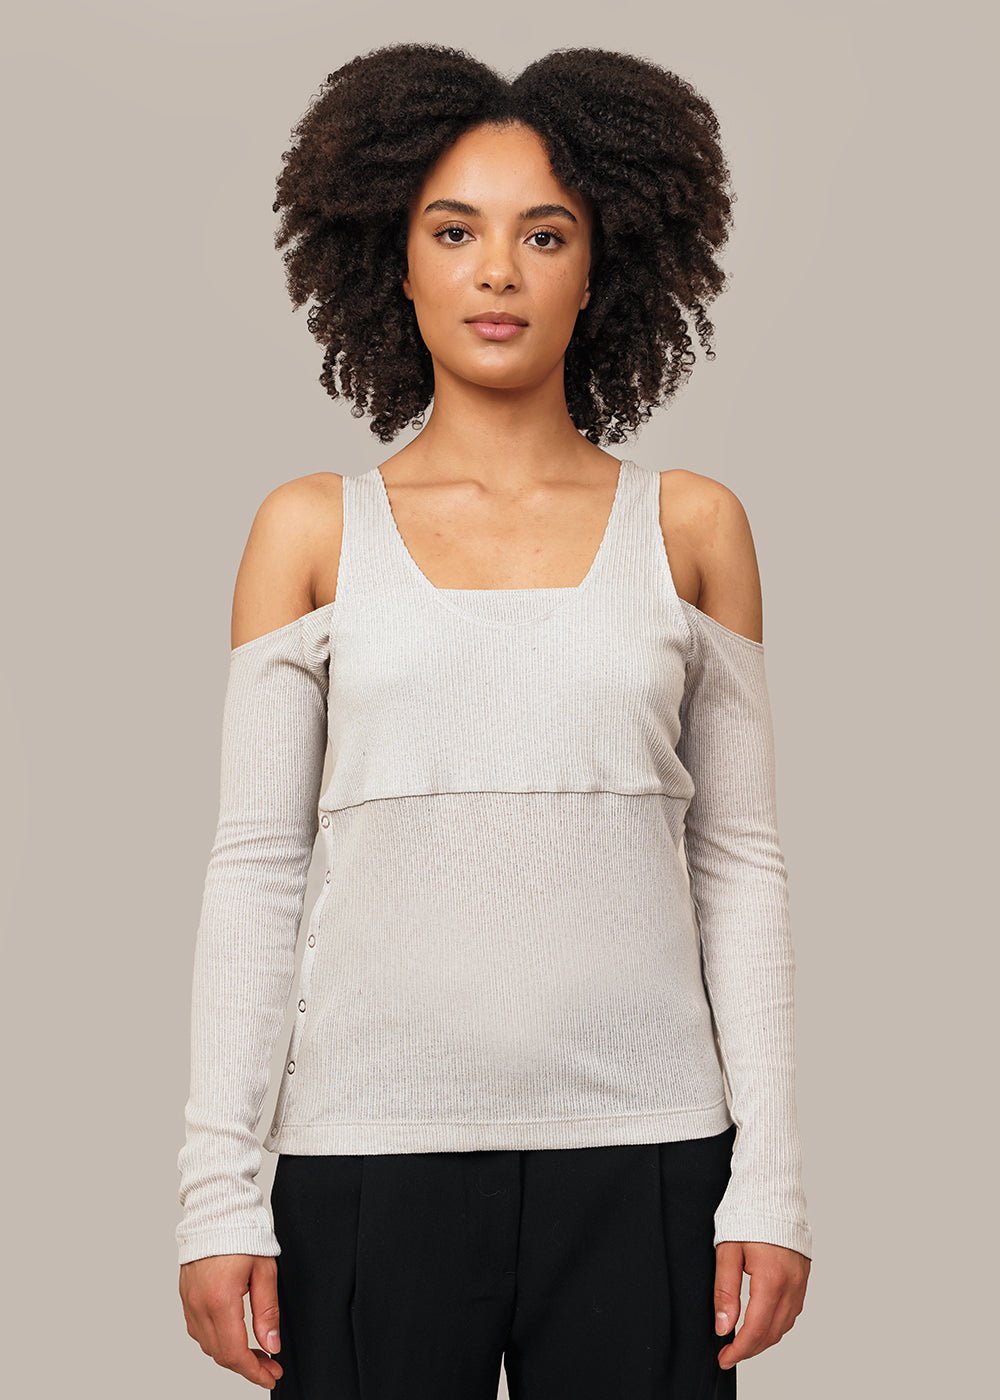 Permanent Vacation Silver Practice Layered Top - New Classics Studios Sustainable Ethical Fashion Canada